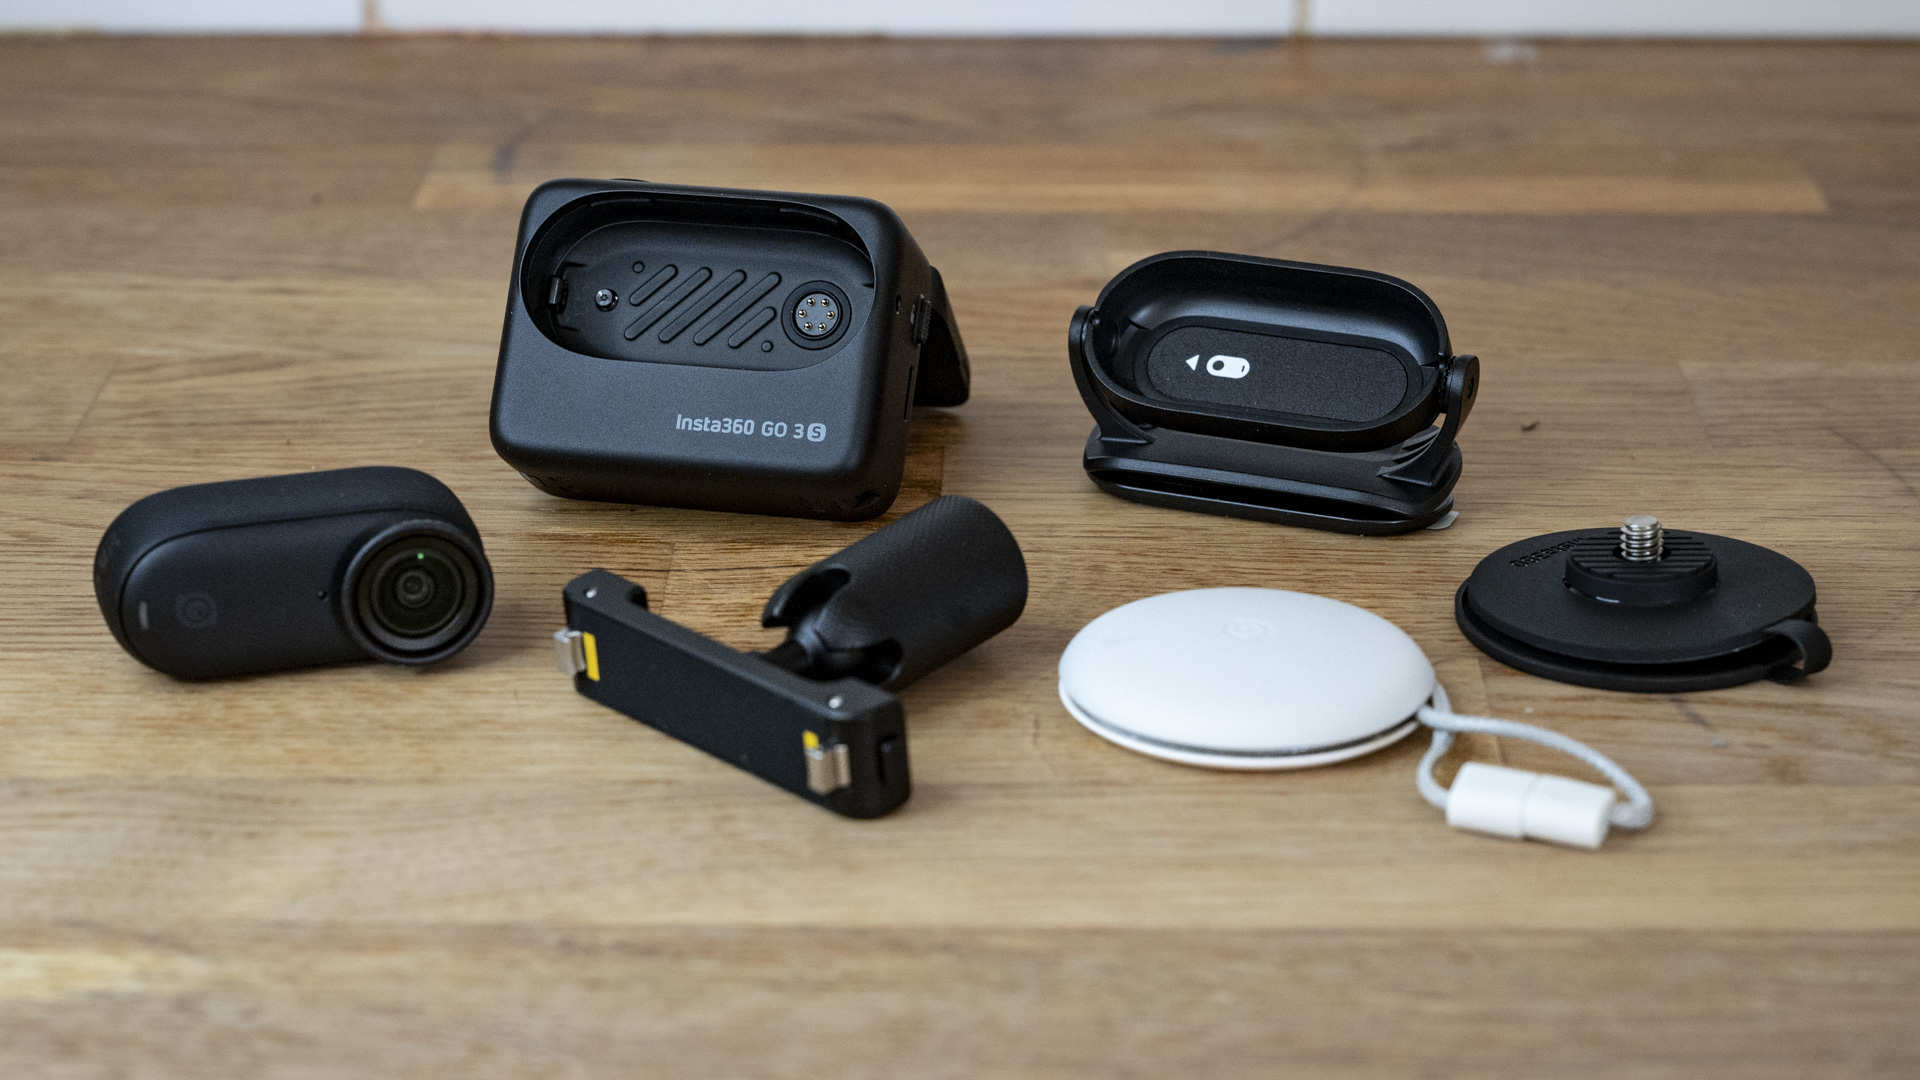 Insta360 Go 3S camera alongside all the supplied accessories on a wooden surface